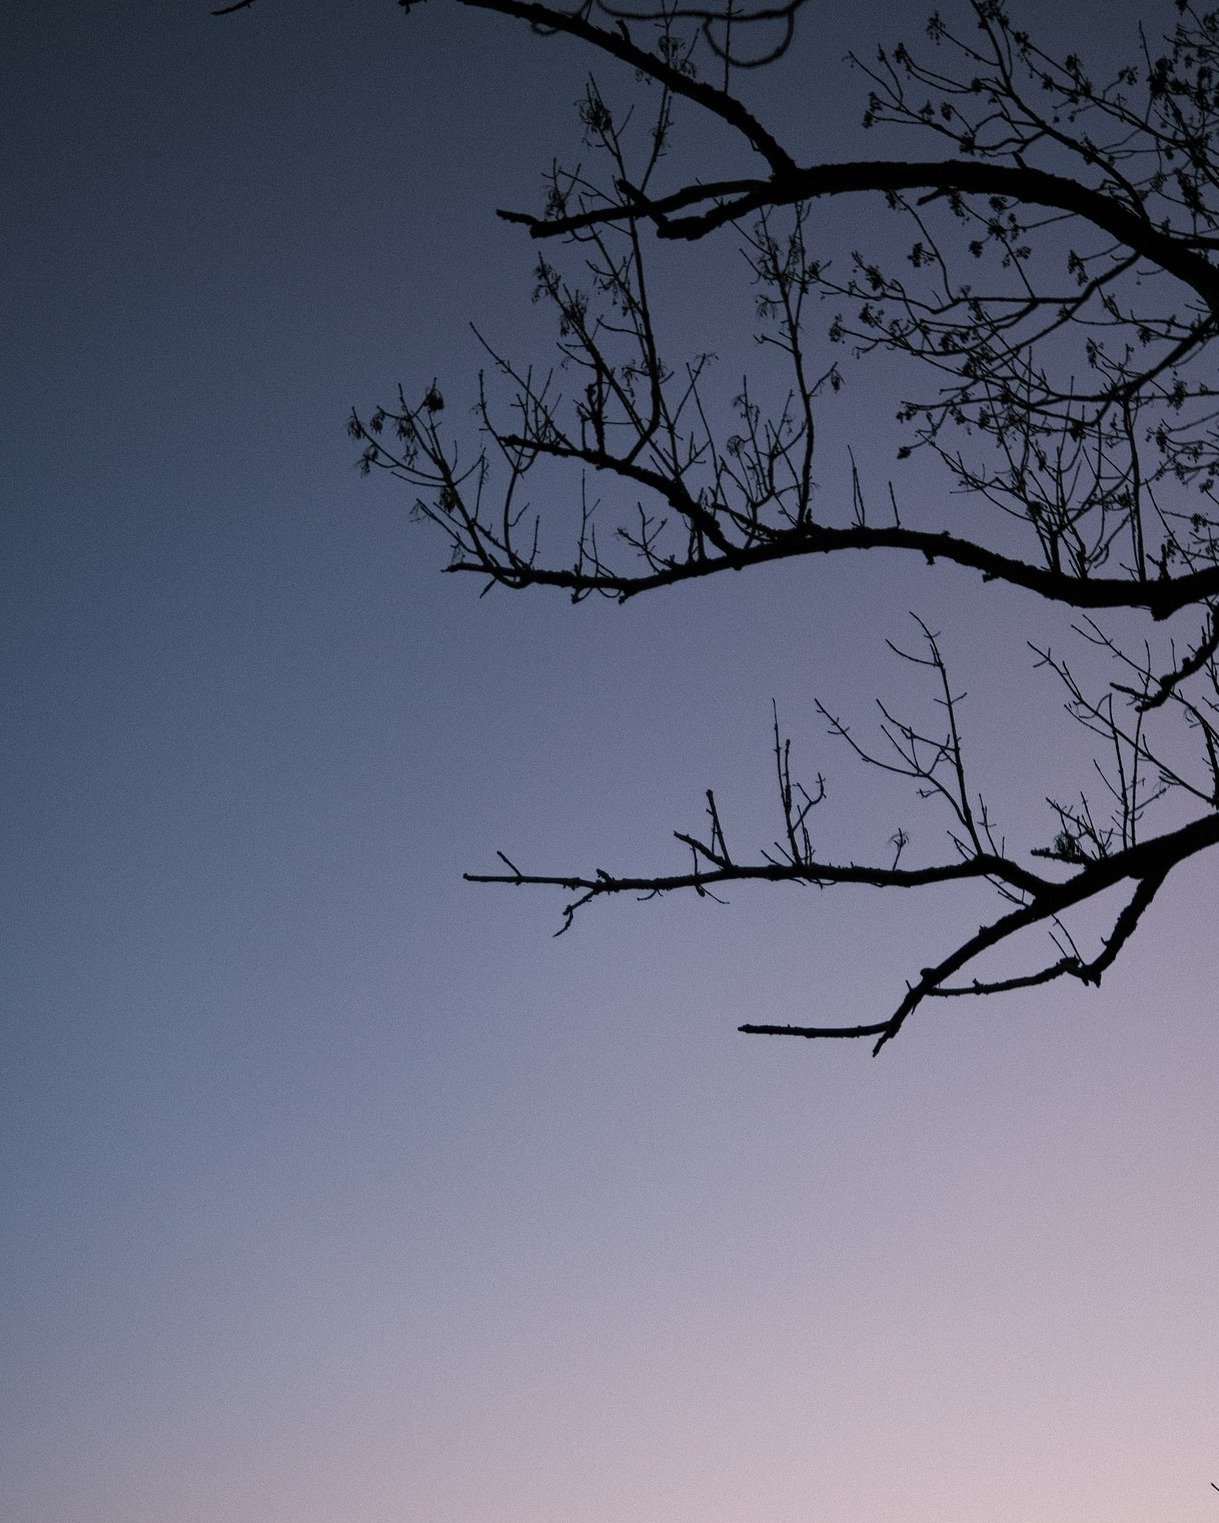 Twilight Branches
Bare branches against the twilight sky, a delicate silhouette offering a quiet end to the day, as nature&rsquo;s lines sketch the evening&rsquo;s last light.
📷 Fujifilm X-T30 II
__
#TwilightPhotography #NaturePhotography #BranchesS